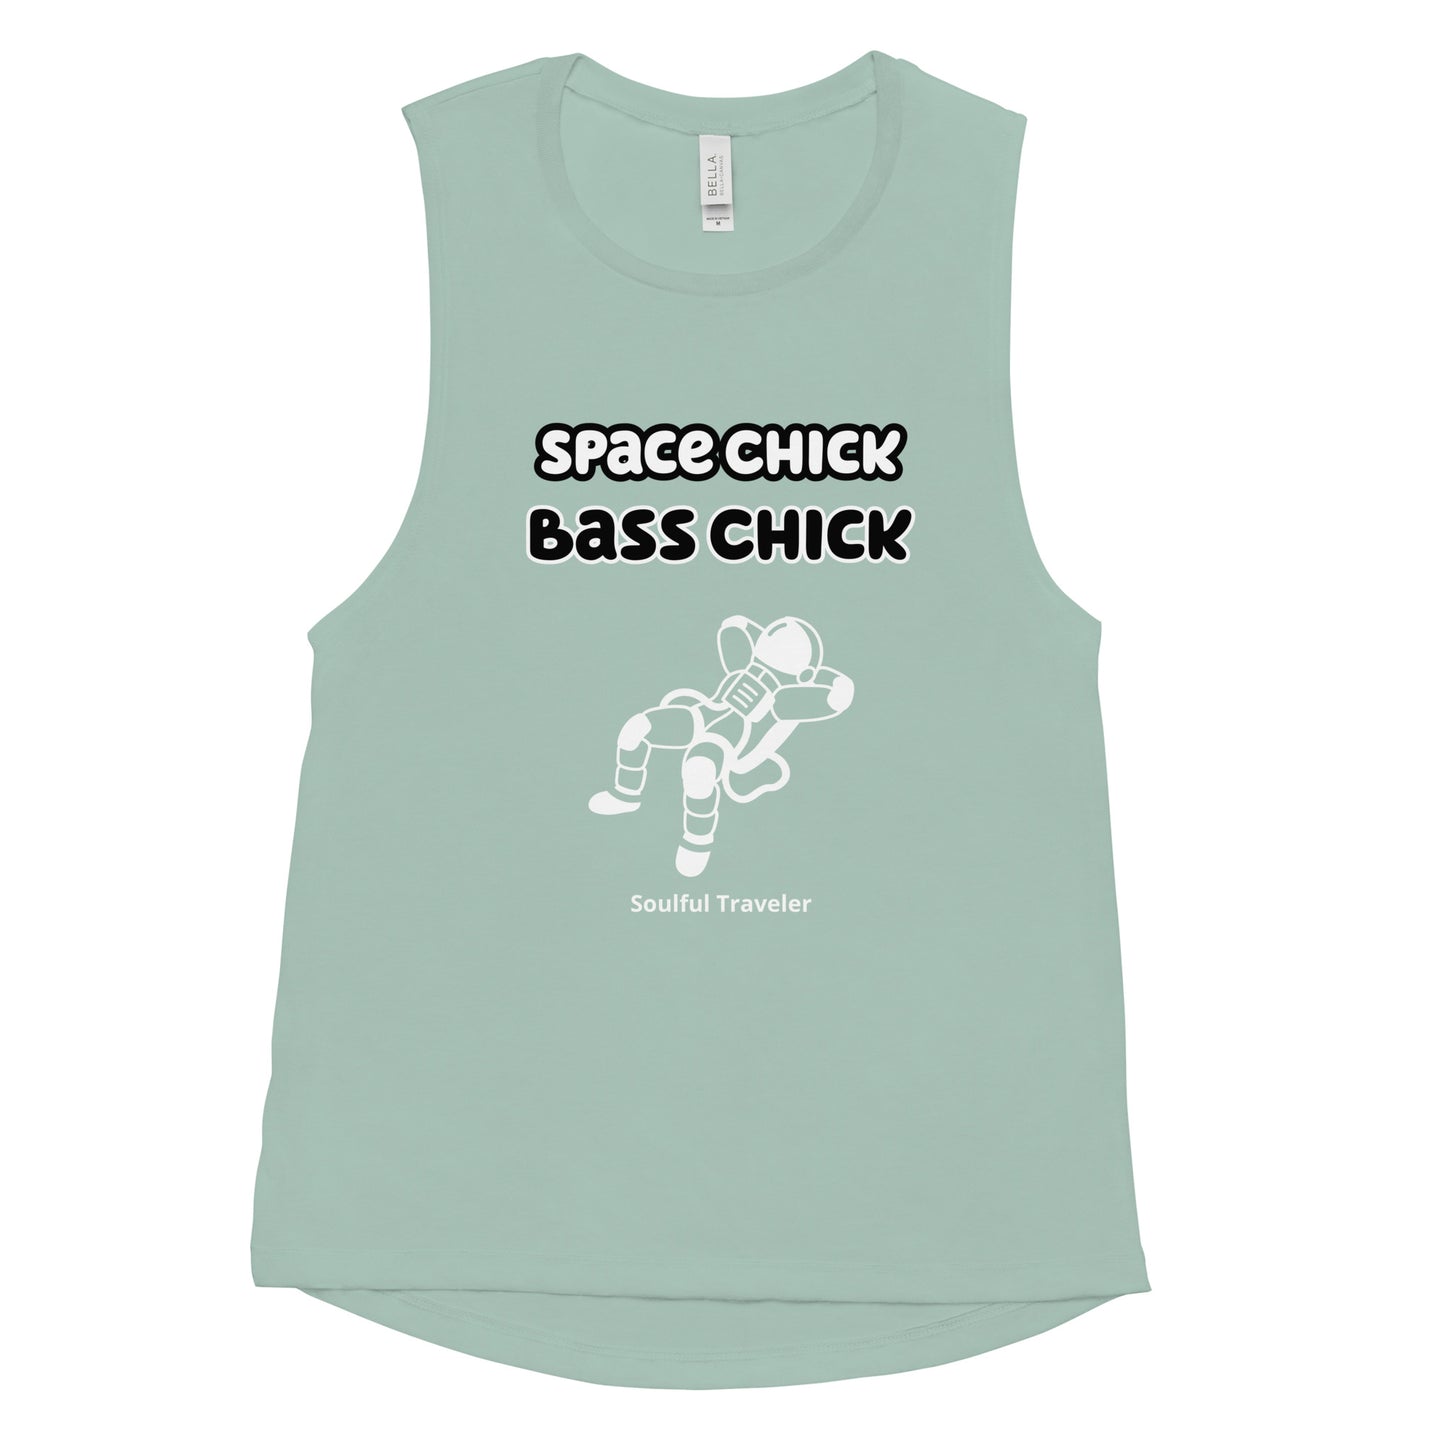 Space Chick Bass Chick Ladies’ Muscle Tank